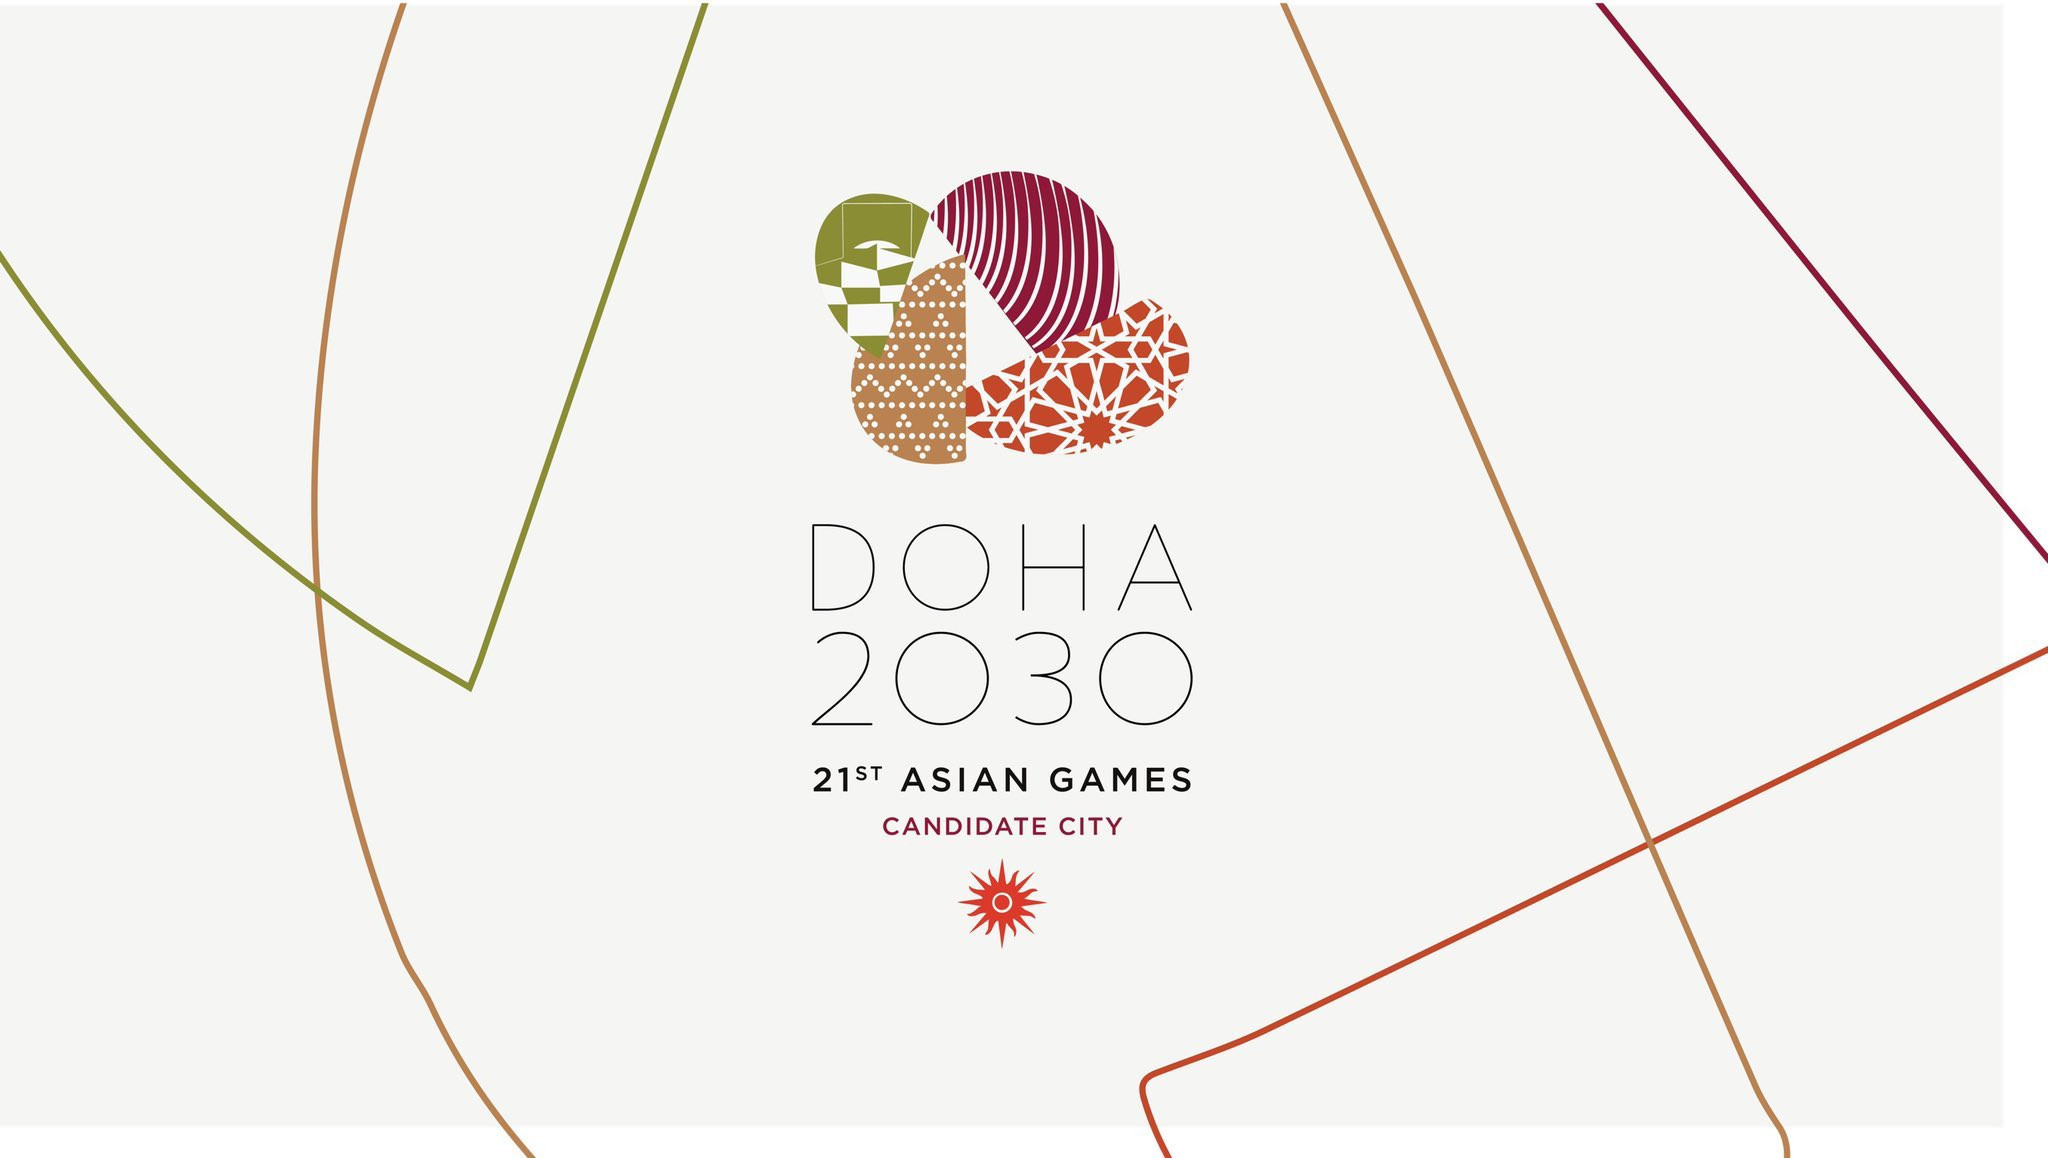 Qatari officials claim the bid for Doha's 2030 Asian Games campaign “reflect Qatar’s combination of tradition and modernity and its commitment to hosting a magical